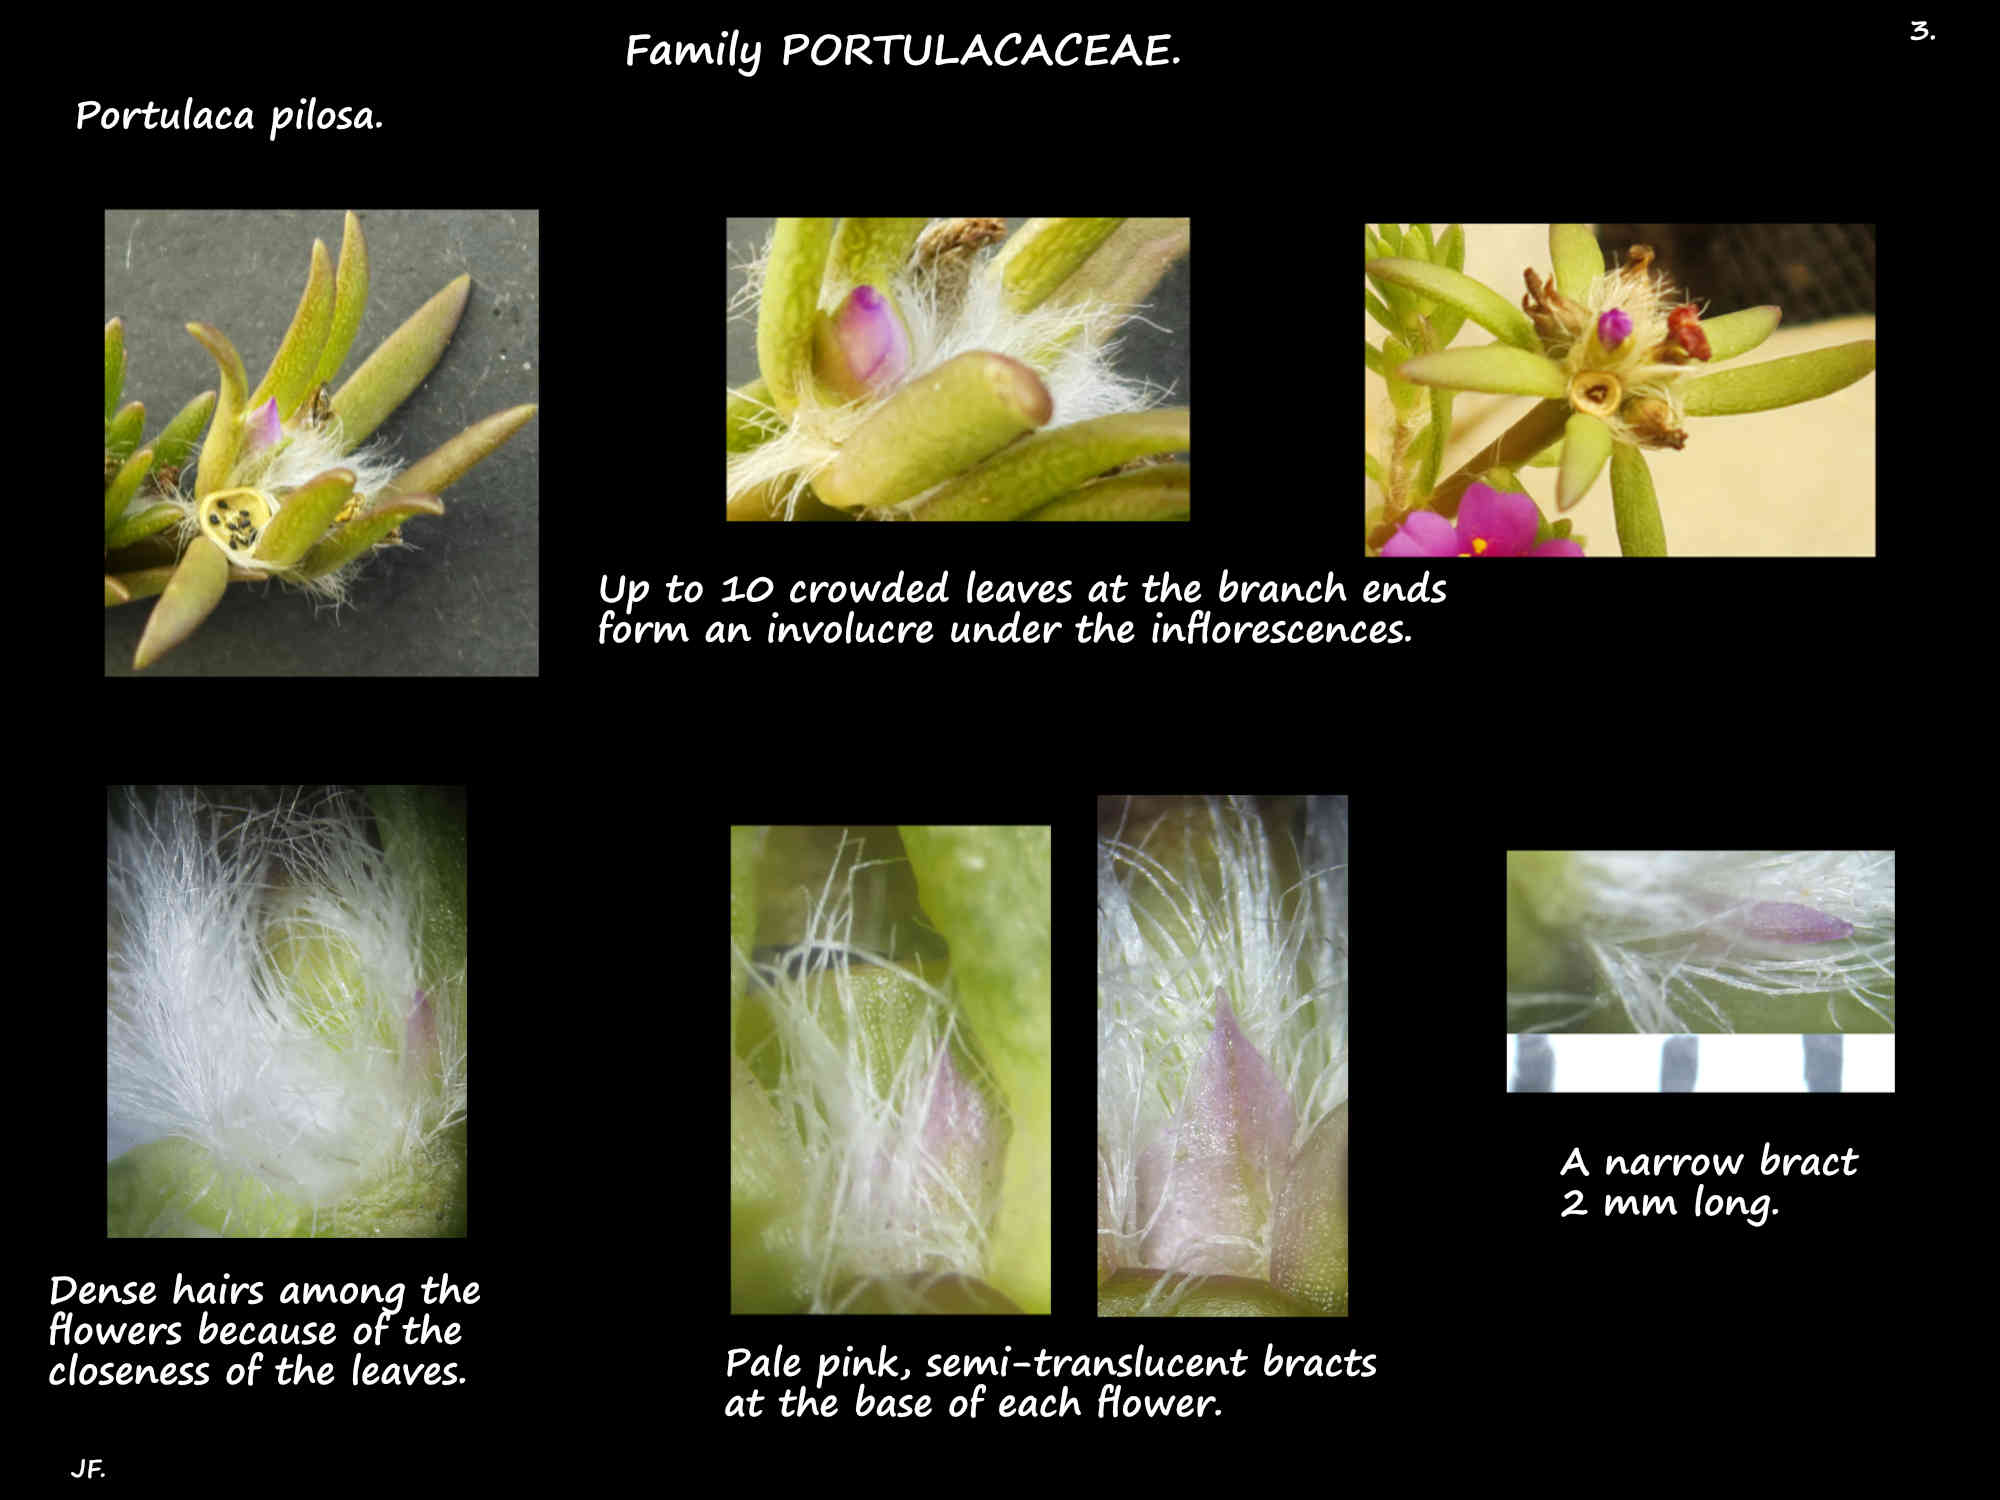 3 Hairs & bracts in Hairy portulaca inflorescences